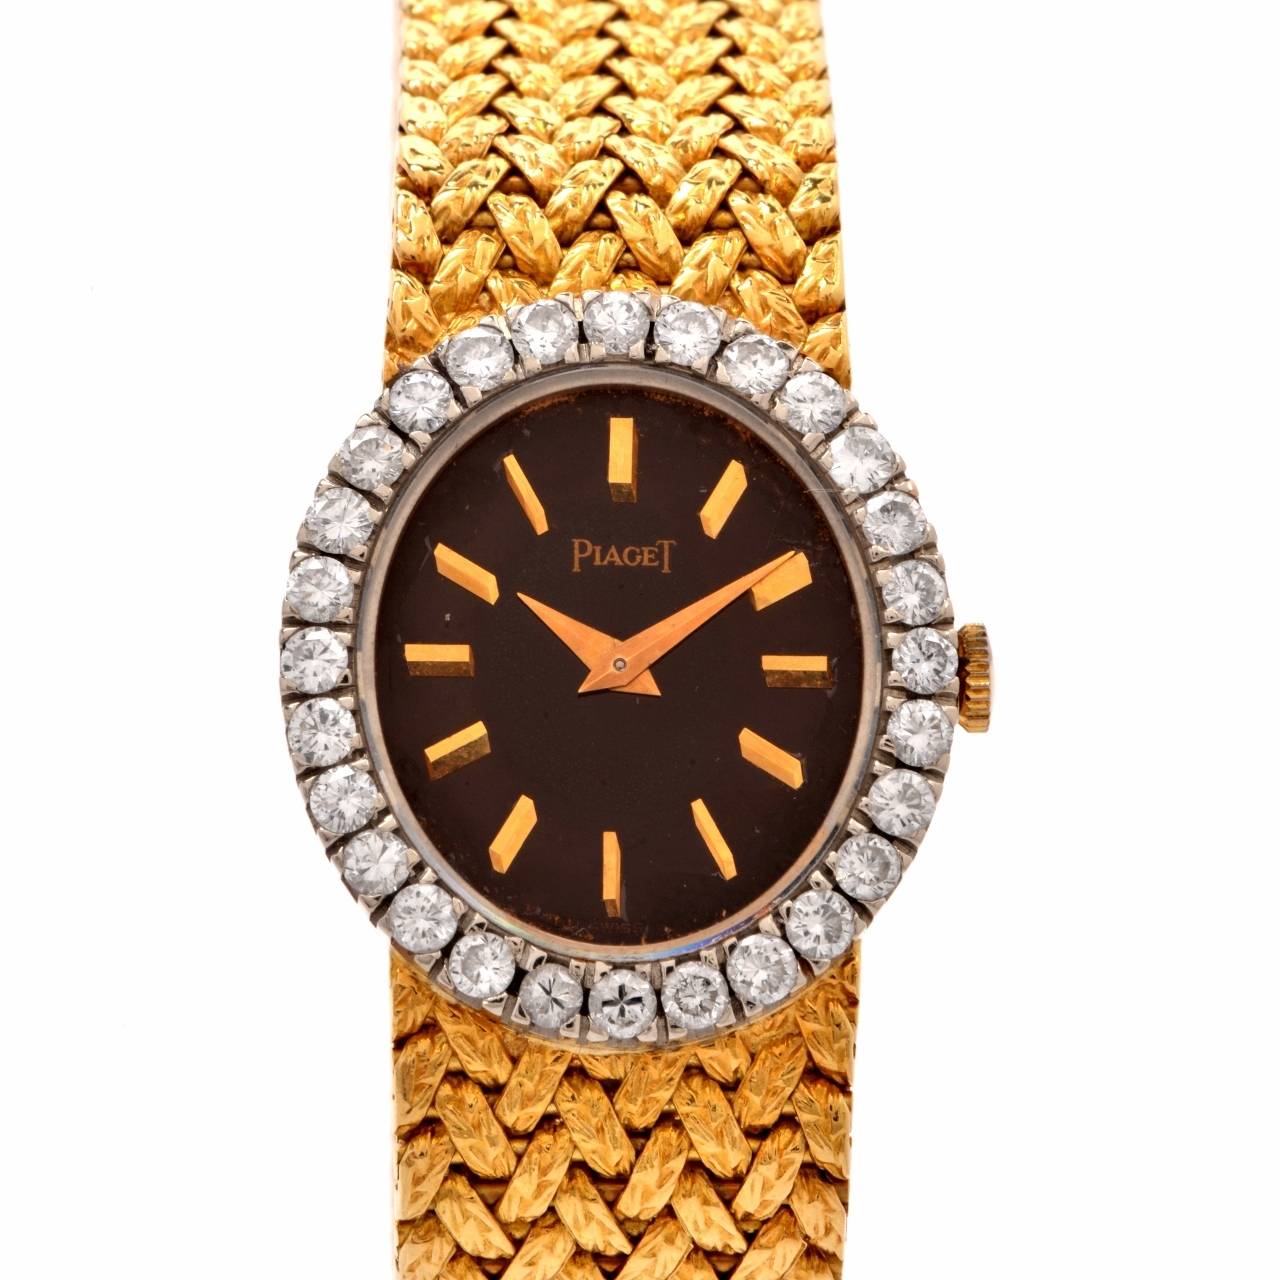 This authentic ladies' vintage circa 1970s Piaget wristwatch of unsurpassed refinement and aesthetic beauty is crafted in solid 18K yellow gold and features  an ovular yellow gold case embellished with a bark finish design border.

This alluring